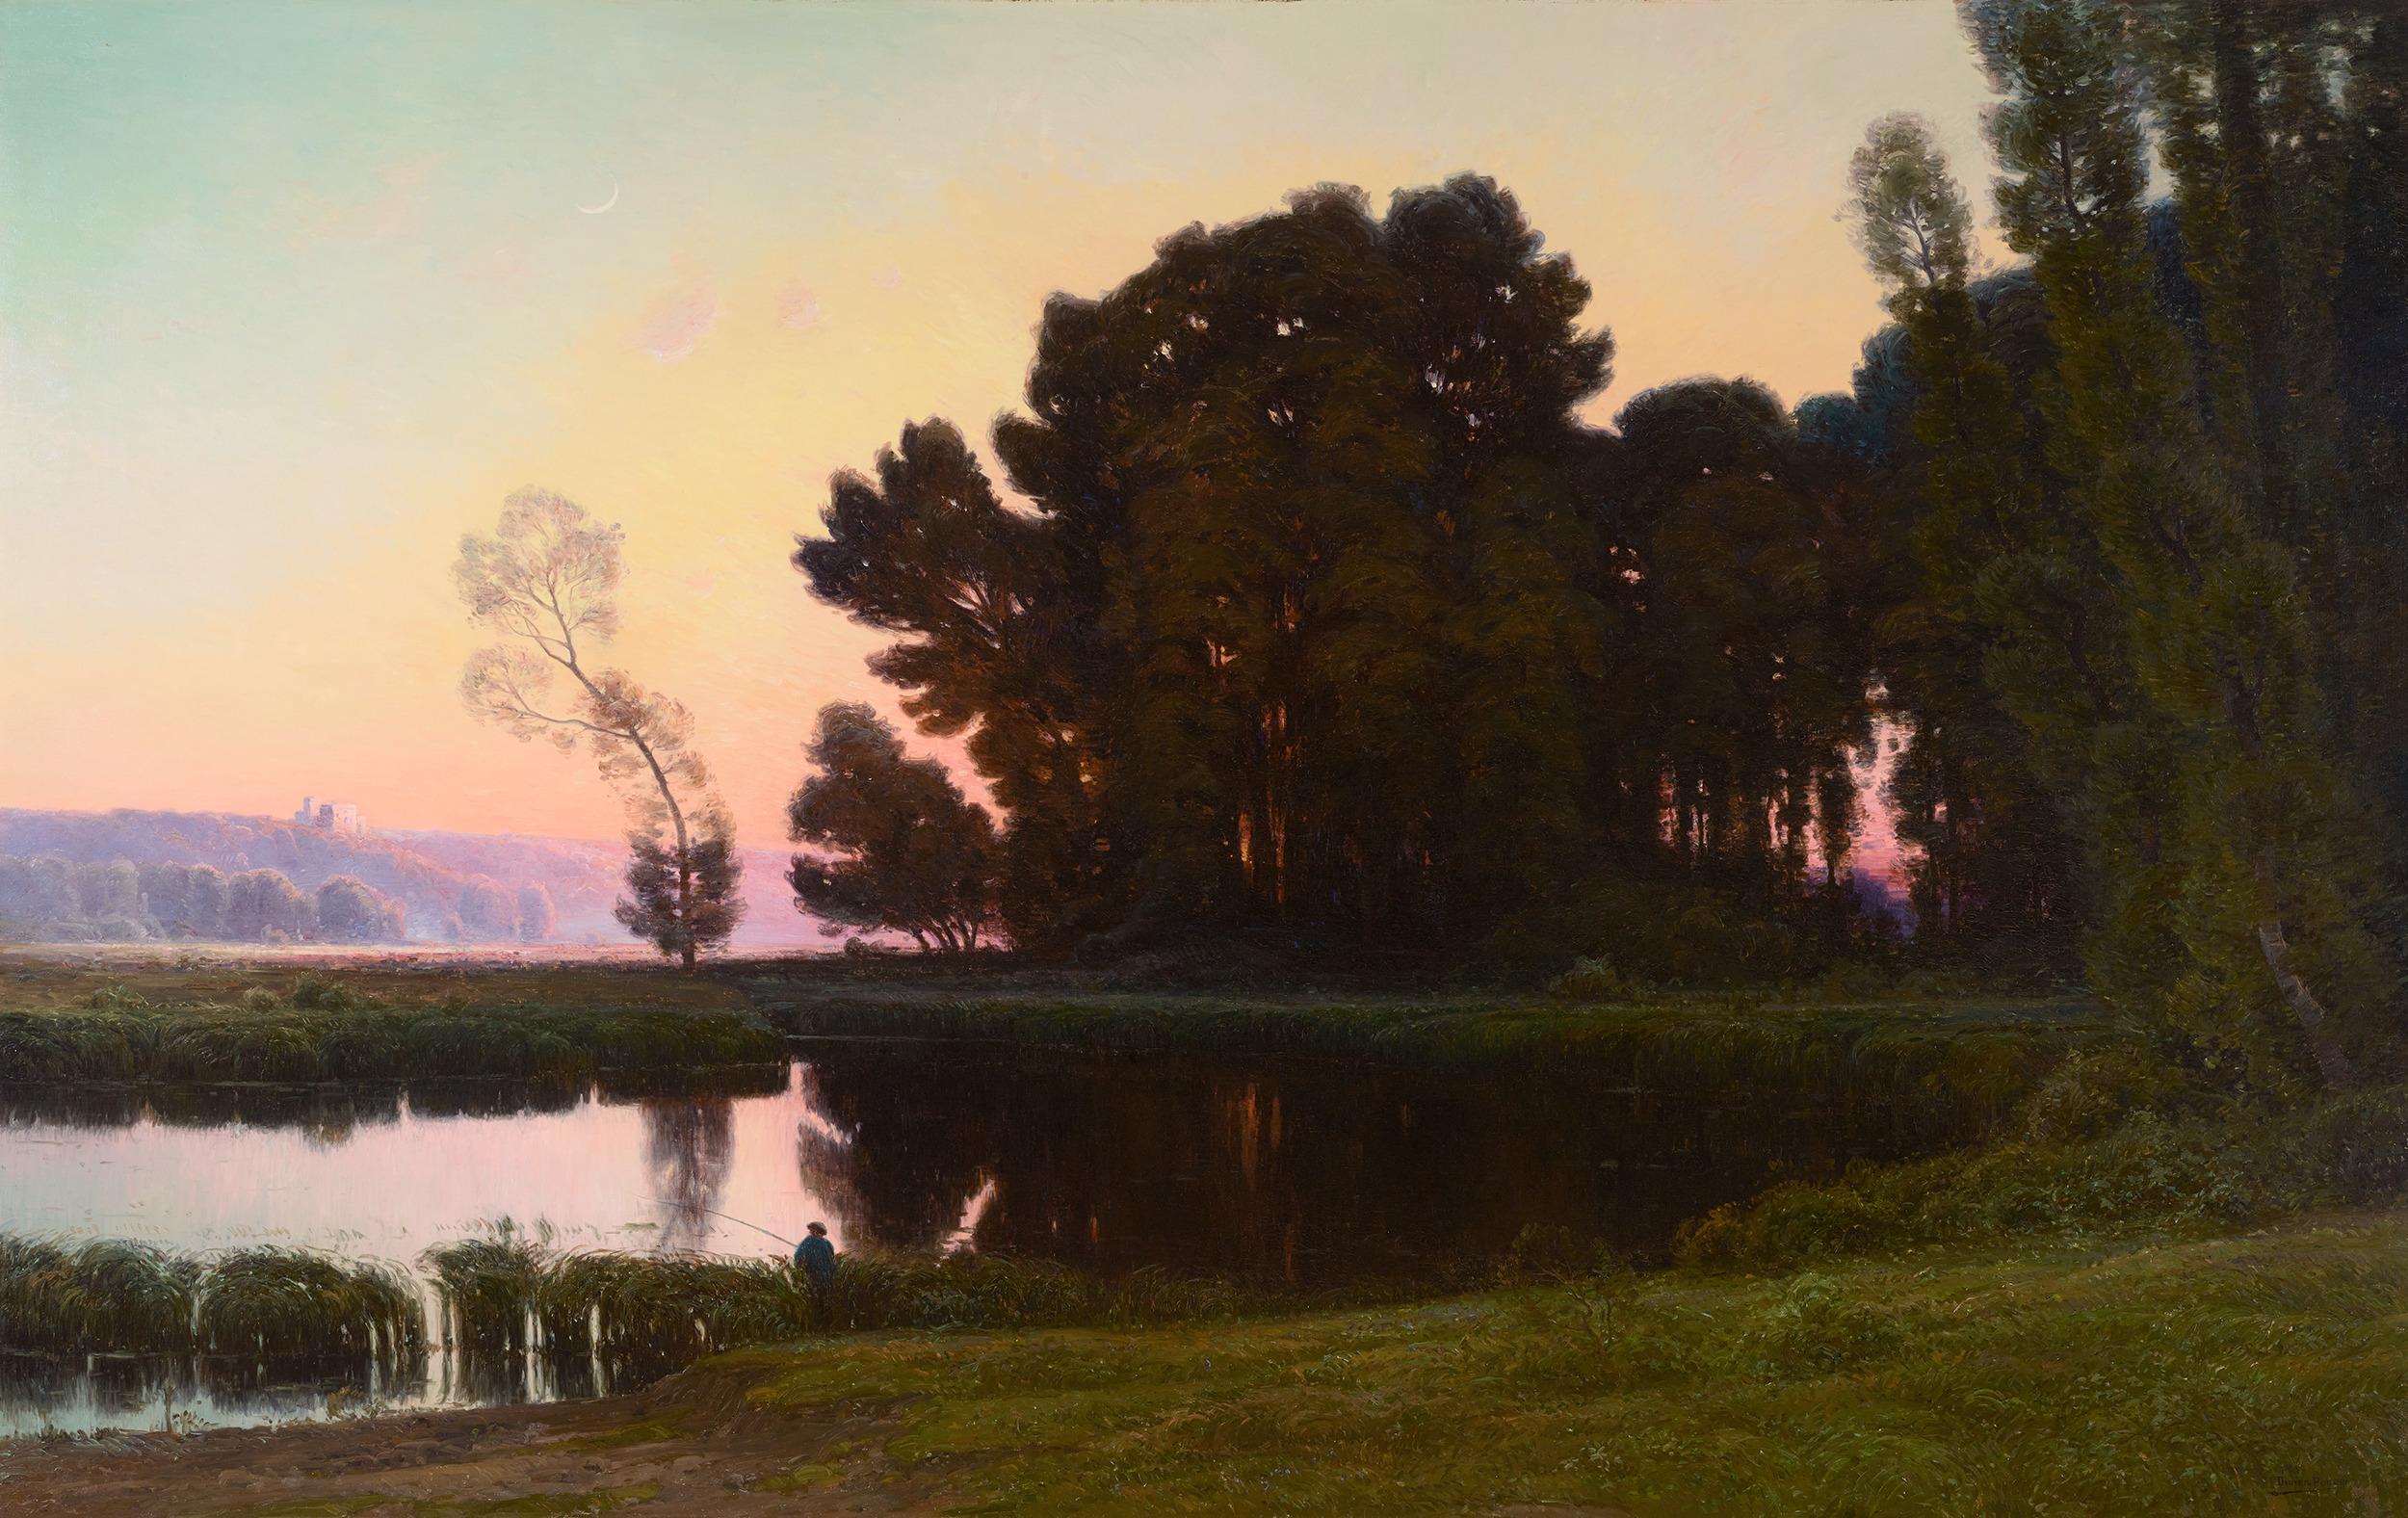 William Didier-Pouget
1864-1959  French

Soleil levant, vallée de la Dordogne (Sunrise, Dordogne Valley)

Signed "Didier-Pouget" (lower right)
Oil on canvas

The majesty of the French countryside comes alive in this radiant masterpiece, Soleil